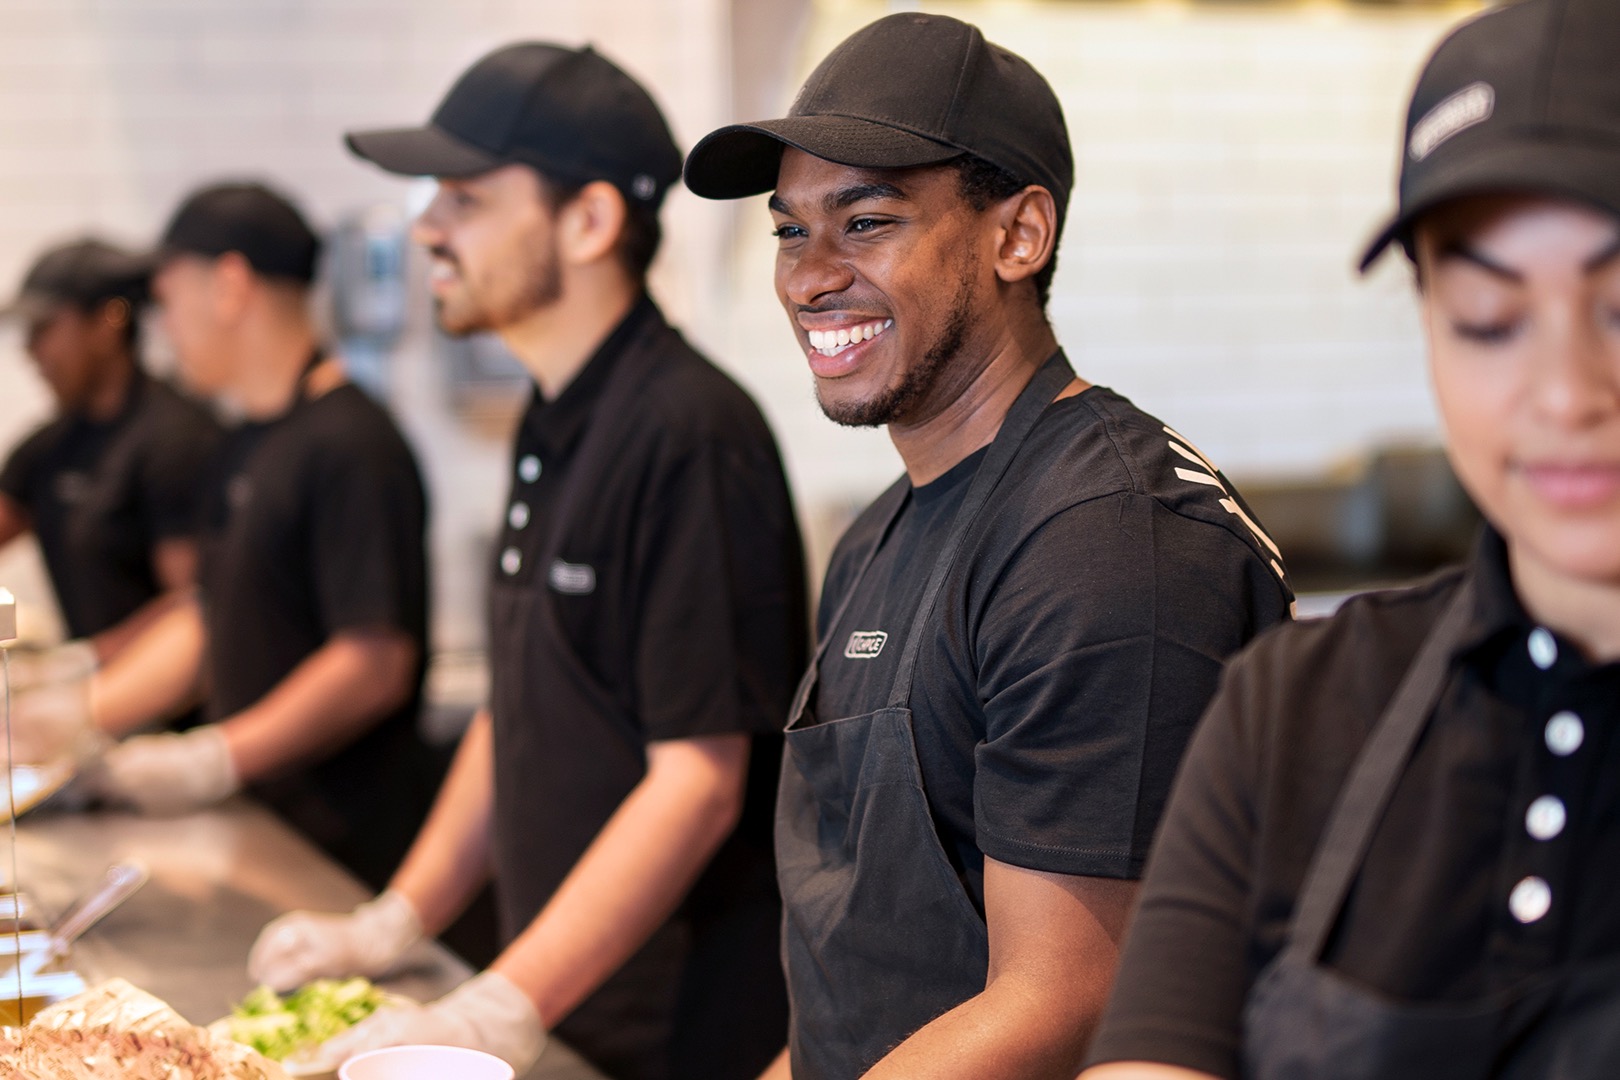 Companies Like Chipotle Are Recognizing ‘Opportunity Youth’ as a Way to ...